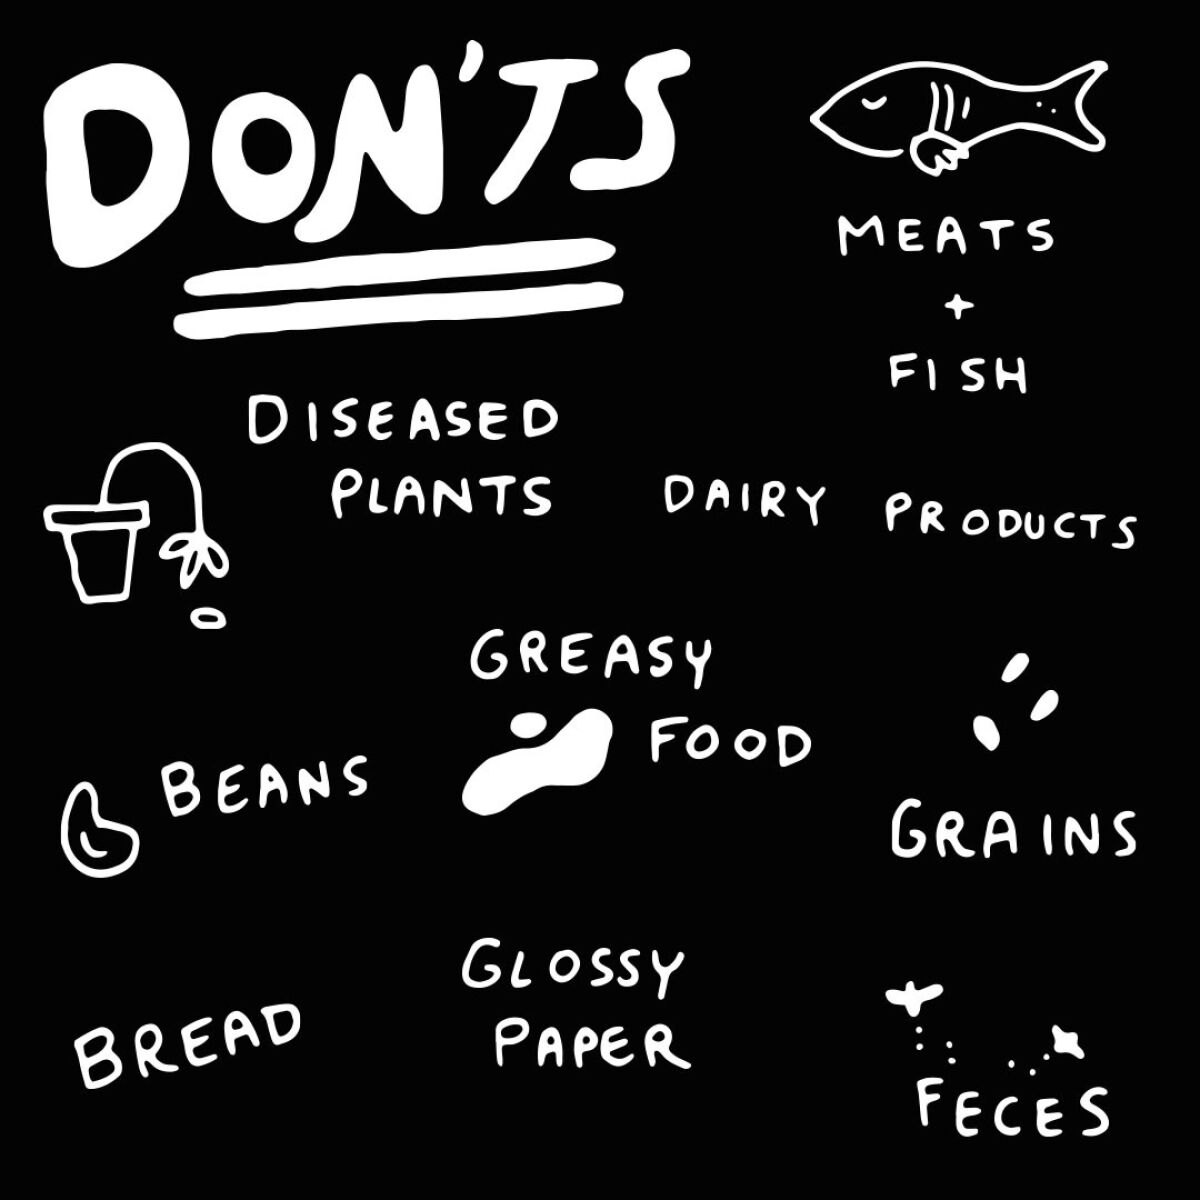 "dont's: bread, beans, diseased plants, meats and fish, dairy products, grains, feces, glossy paper, greasy food."